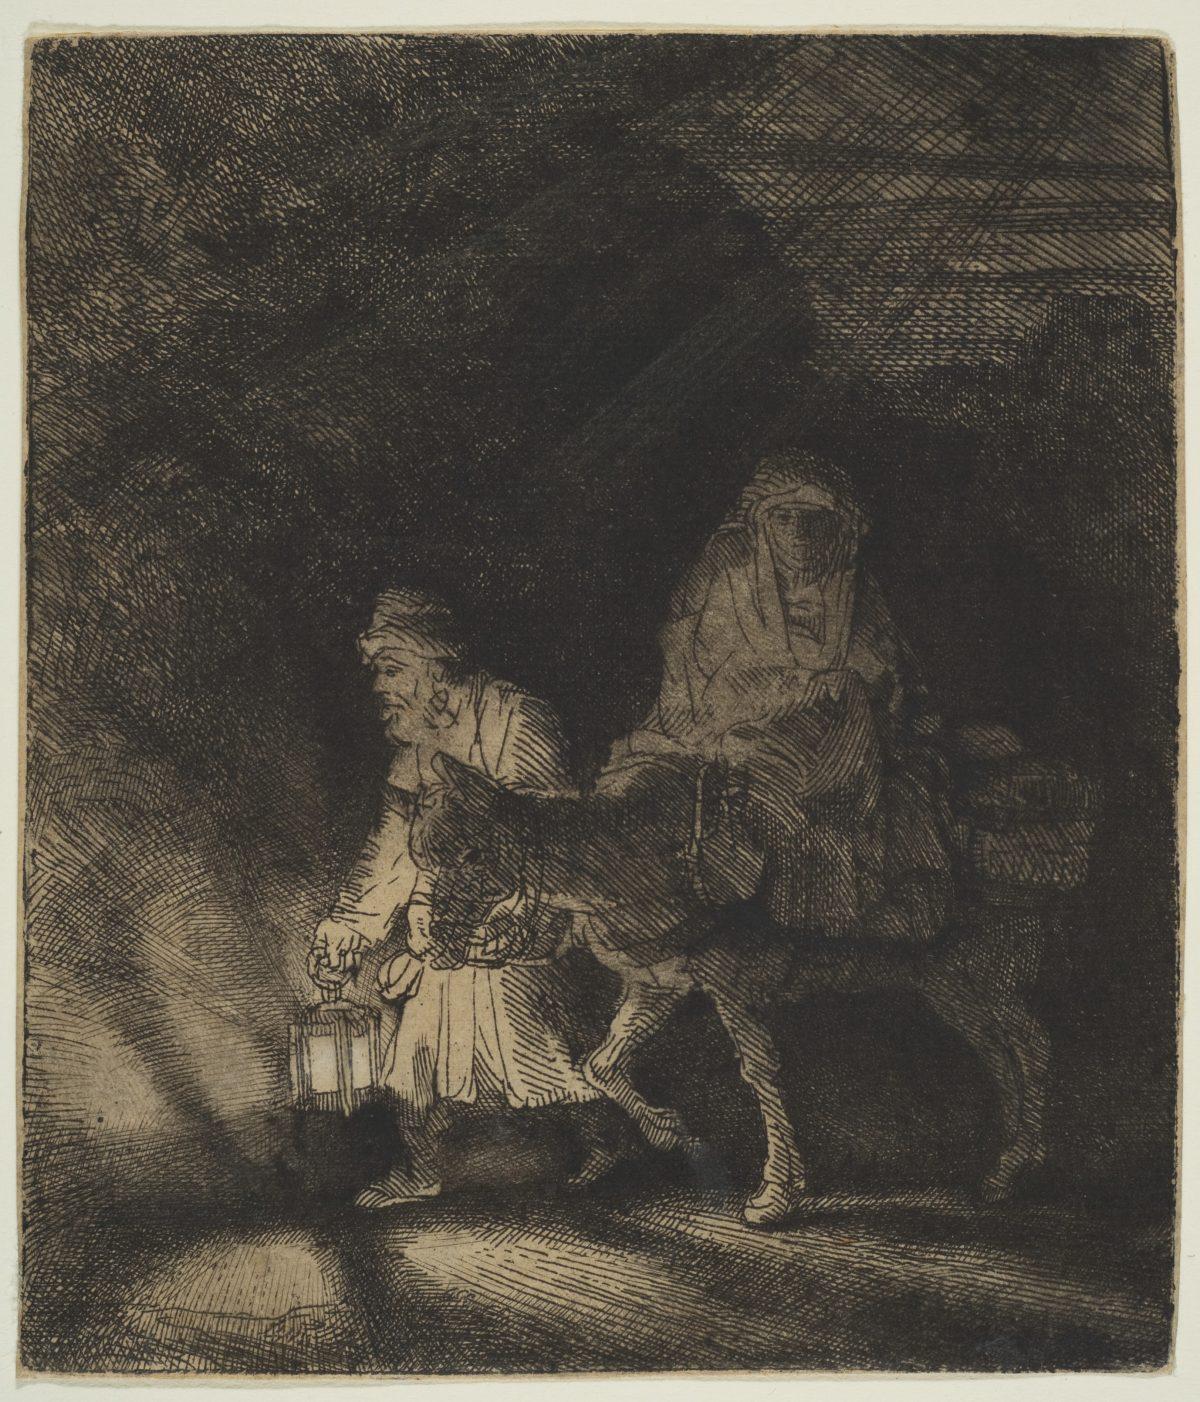 “The Flight Into Egypt: A Night Piece,” 1651, by Rembrandt van Rijn. Etching with plate tone; first state of ten. Sheet: 5 1/16 inches by 4 3/8 inches. Gift of Felix M. Warburg and his family, 1941. (The Metropolitan Museum of Art)